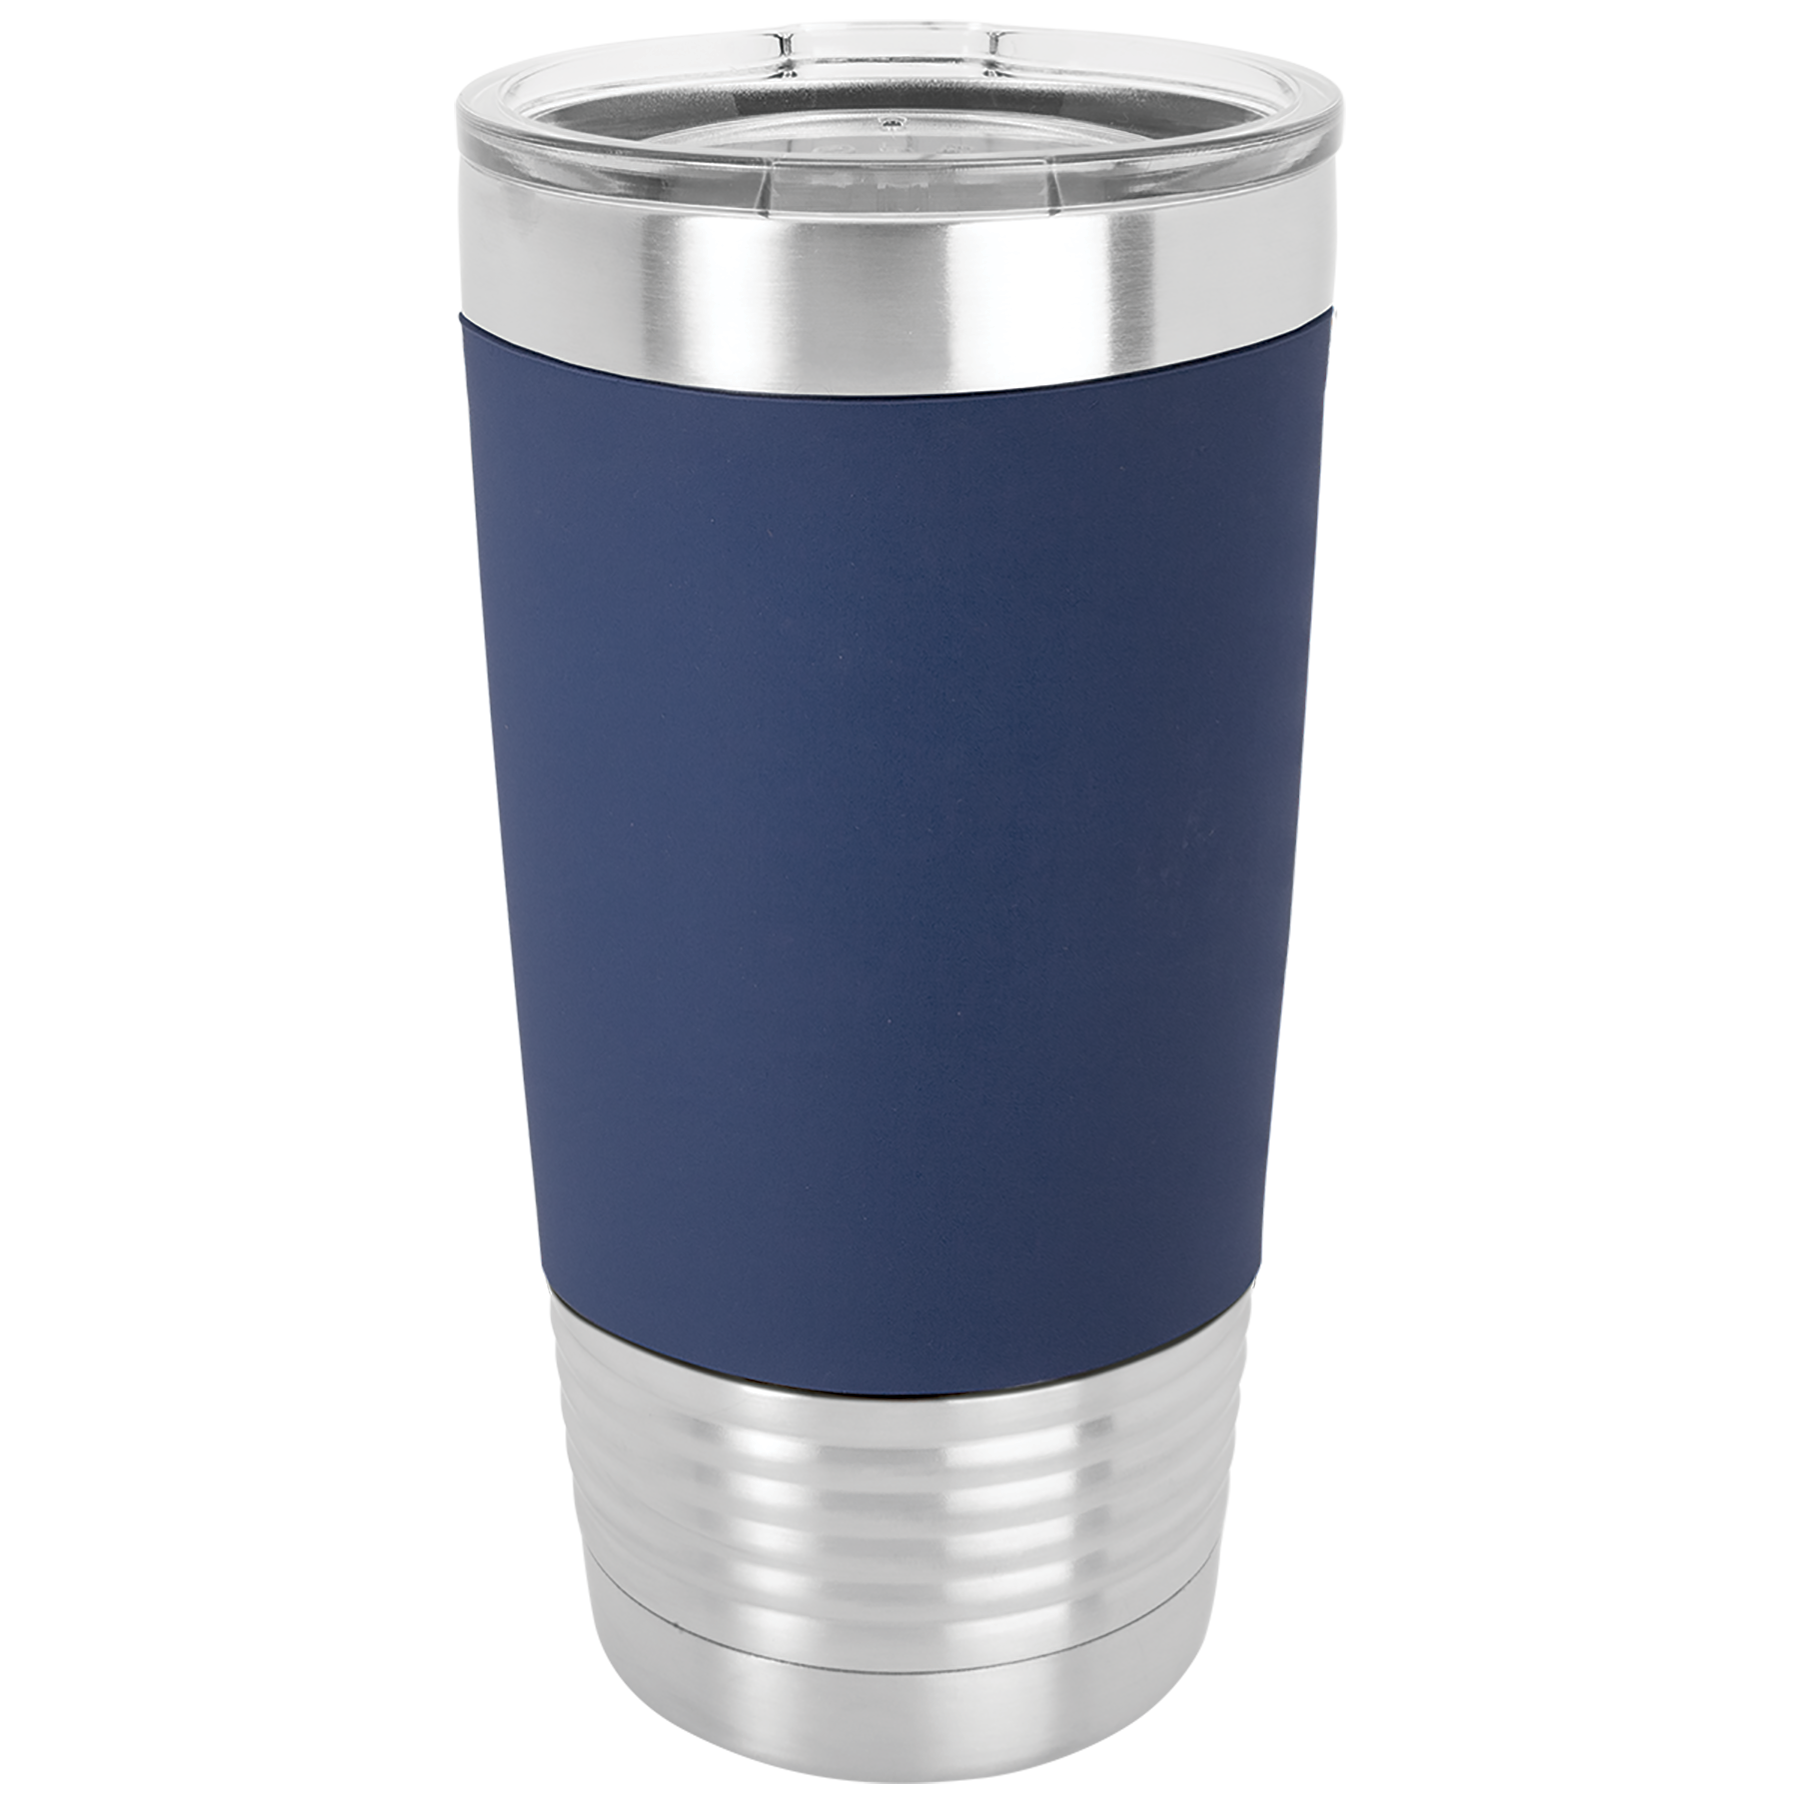 Navy Engraves to White 20oz Silicone Grip Tumbler -One Free Engraving -Double-wall Vacuum Insulated -Made from 18/8 Gauge Stainless Steel (Type 304 Food Grade) -Lid is BPA Free (Hand Wash Only) -Not recommended for Dishwasher -Silicone Sleeve is Removable -Works with Cold and Hot Drinks -7 Color Options -Perfect for Personalized Gifts, Awards, Incentives, Swag & Fundraisers